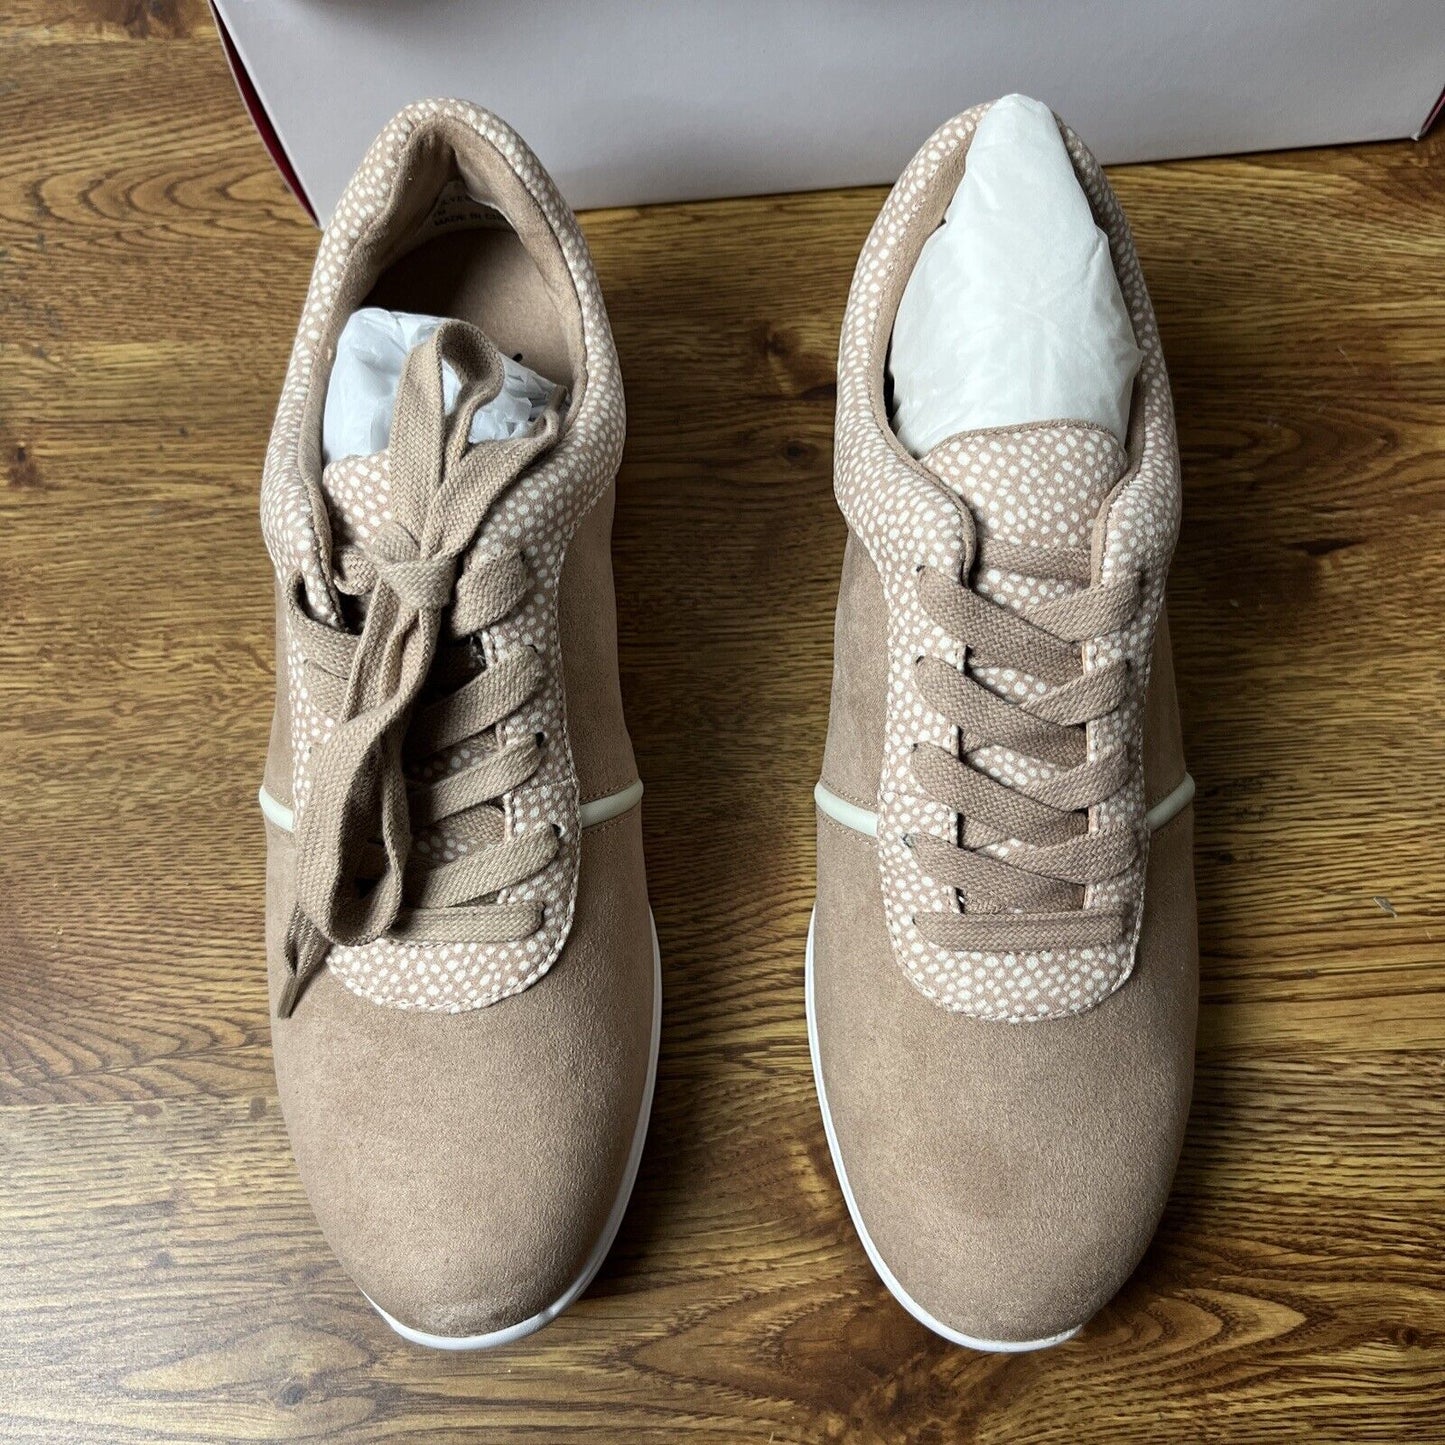 Isaac Mizrahi Live! Suede Contrast Dot Lace-Up Sneakers-Blush Size 7 MEDIUM